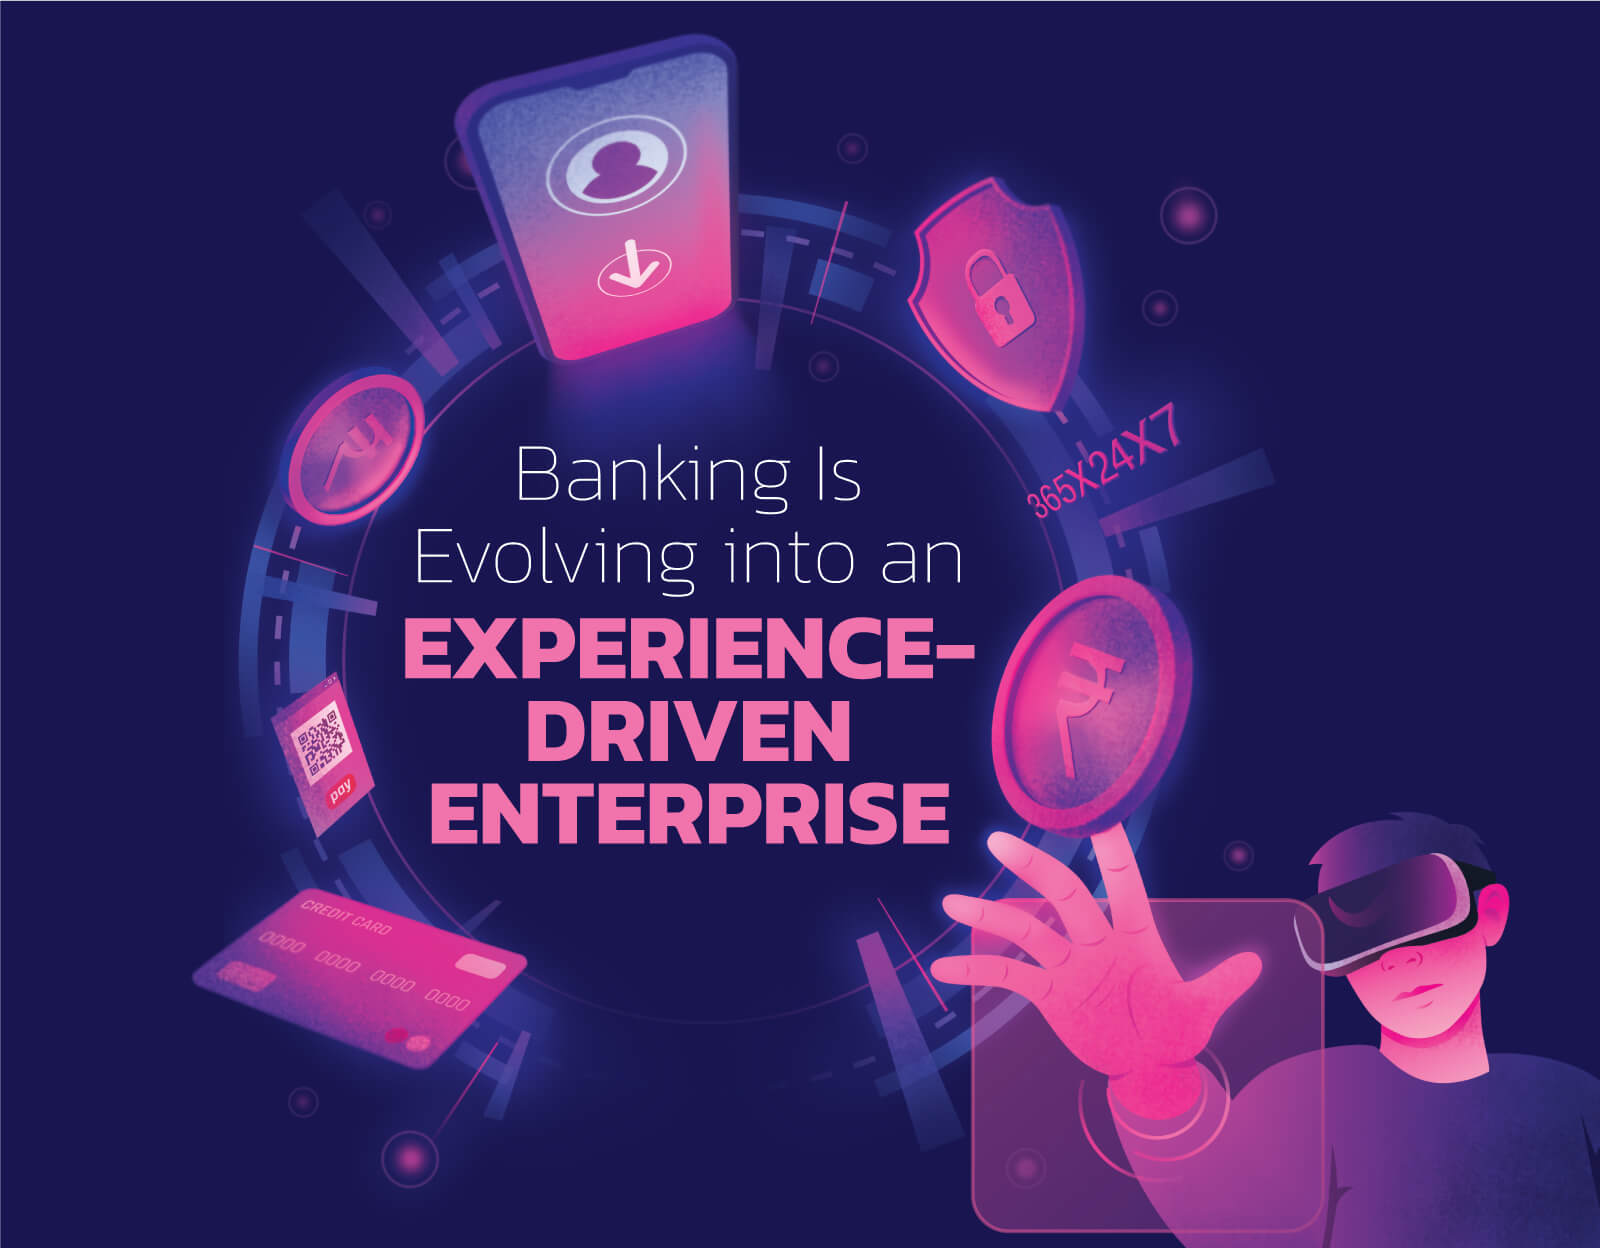 Banking Is Evolving into an Experience-driven Enterprise